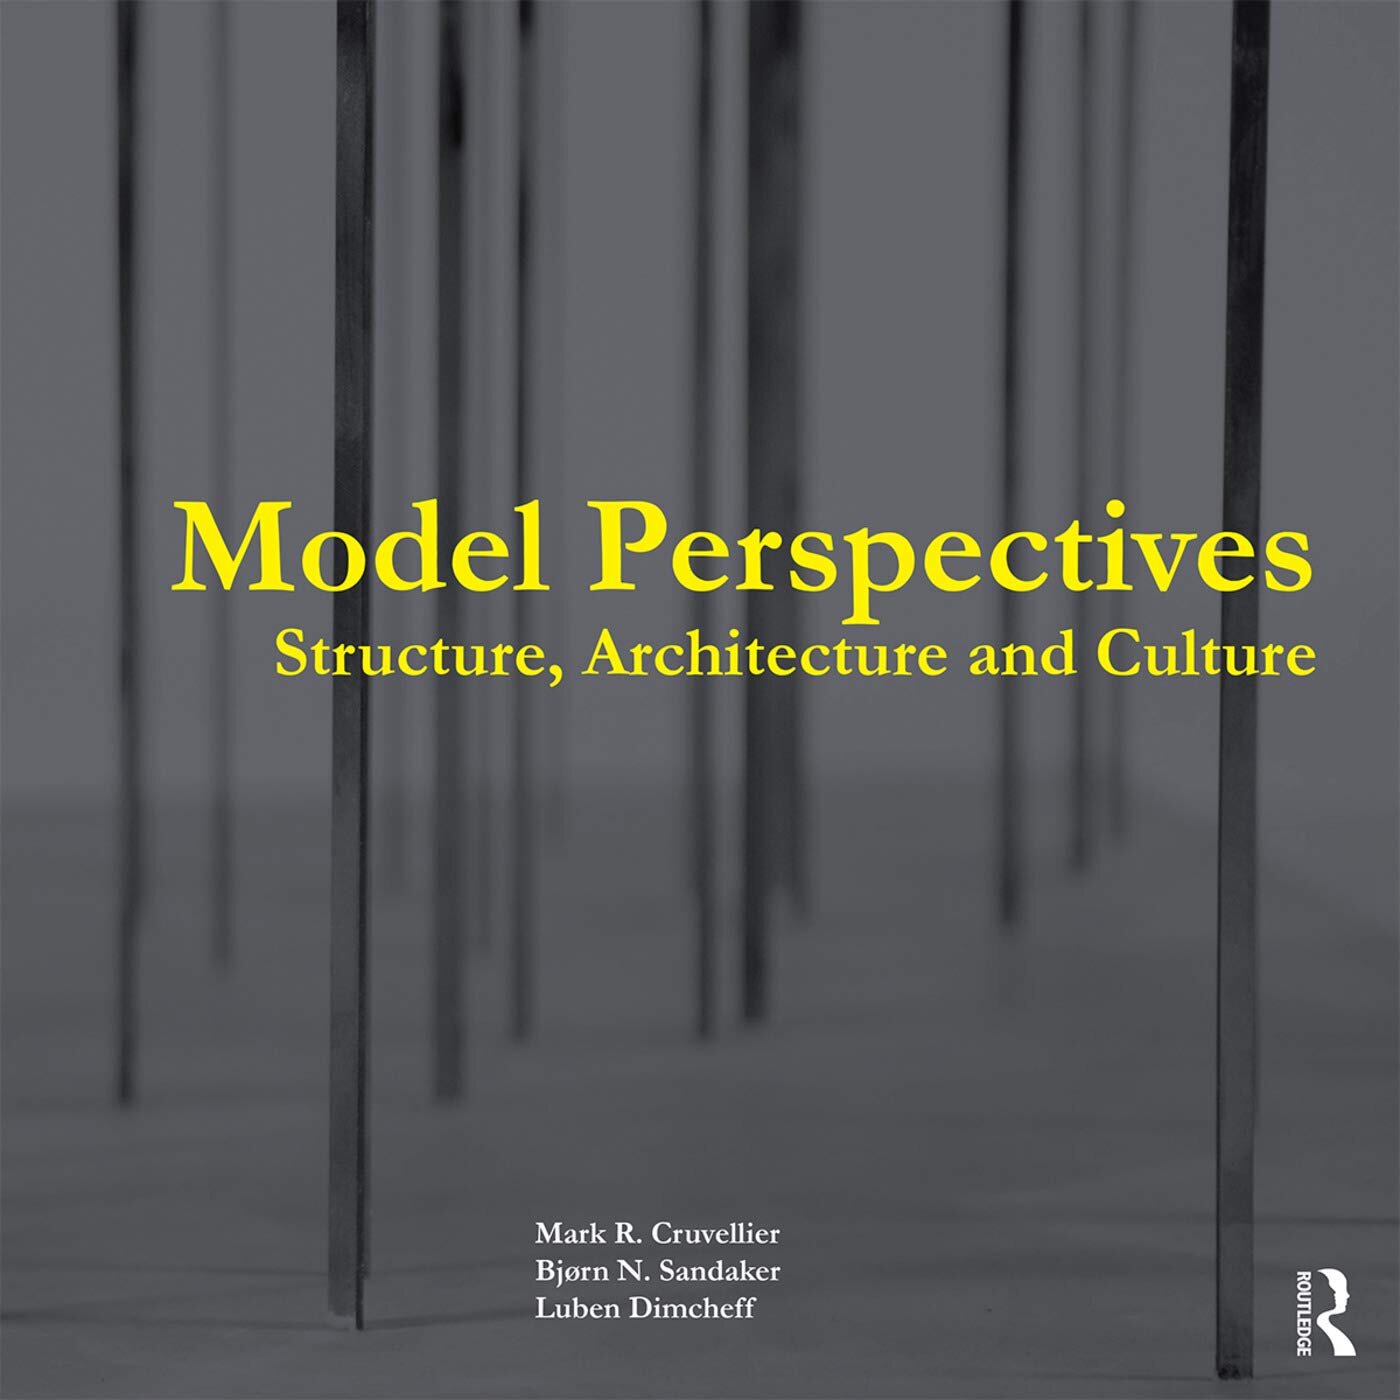 Model Perspectives: Structure, Architecture and Culture, $71.34